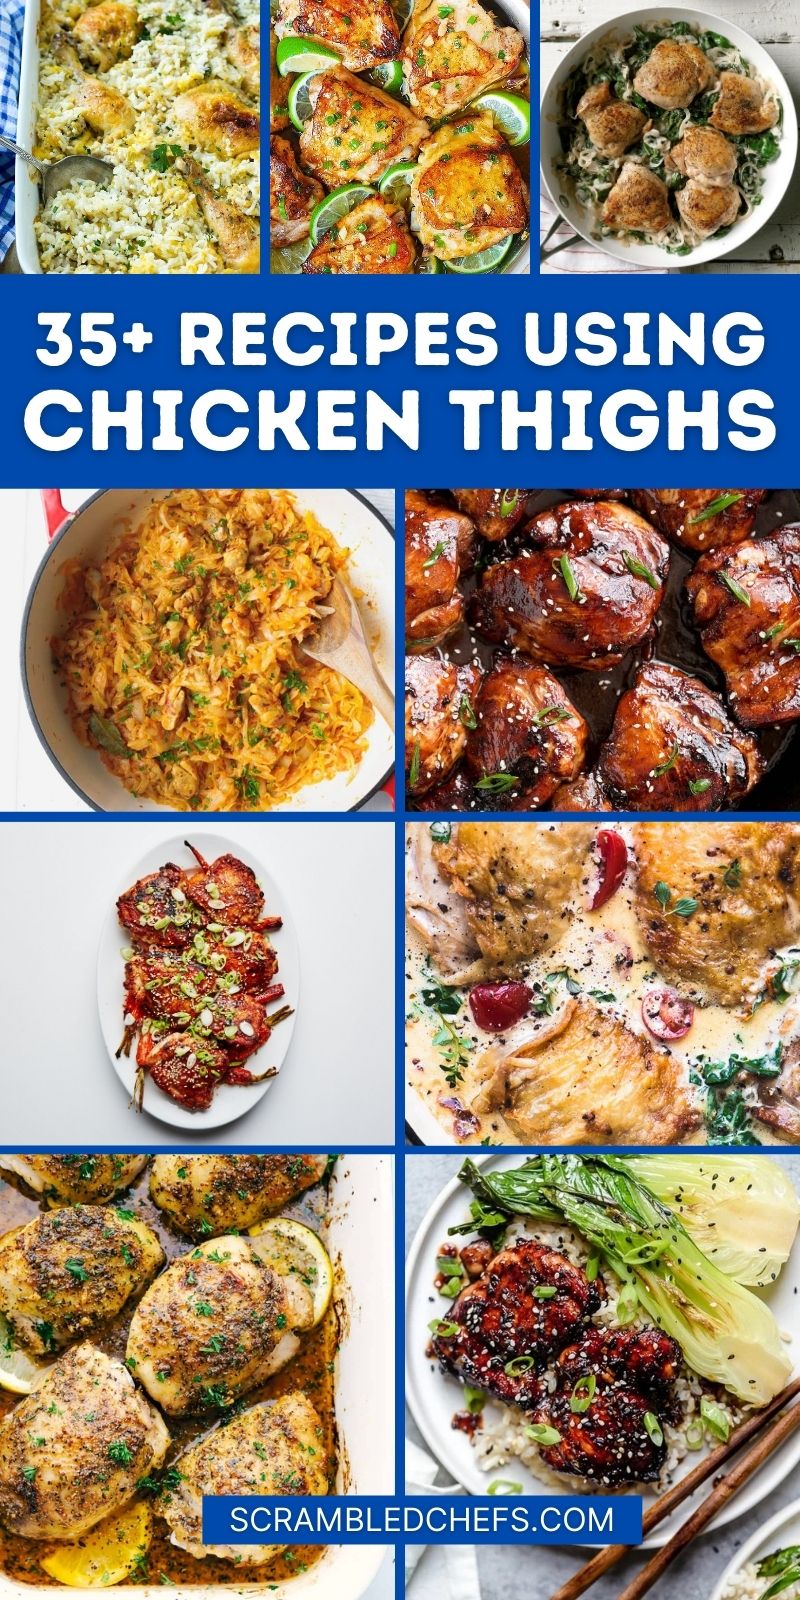 35 Flavorful Chicken Thighs Recipes for Easy Dinners - Scrambled Chefs